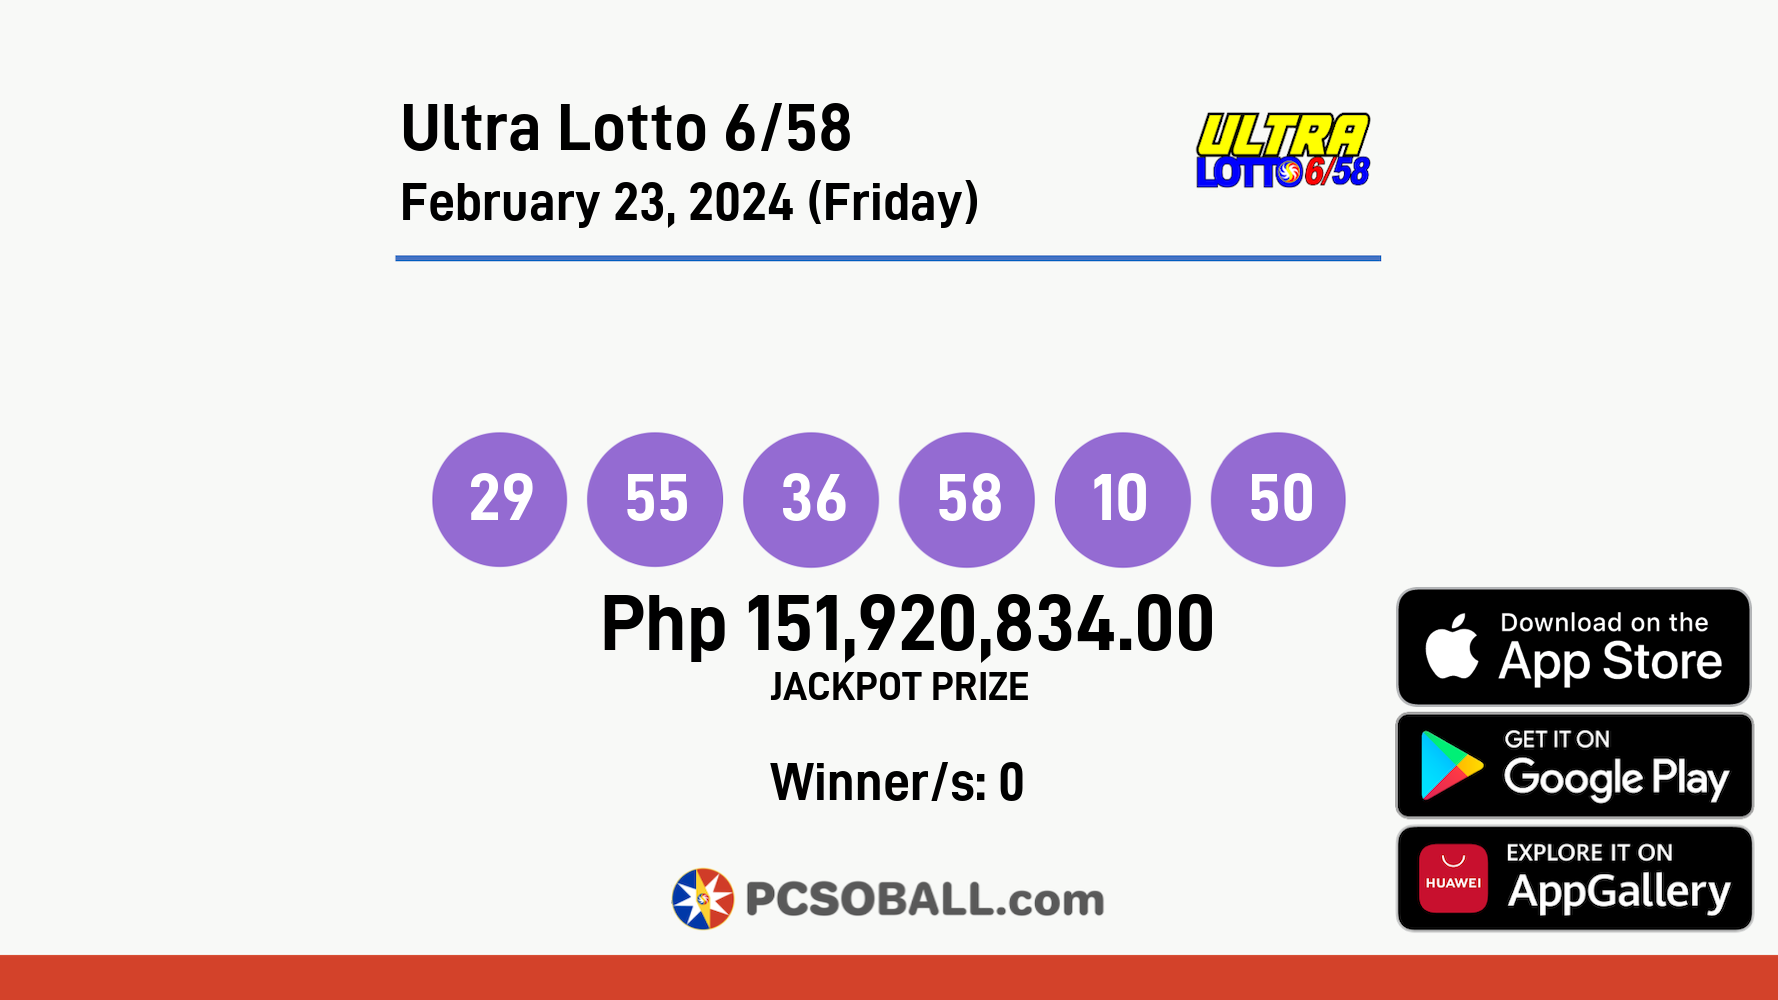 Ultra Lotto 6/58 February 23, 2024 (Friday) Result